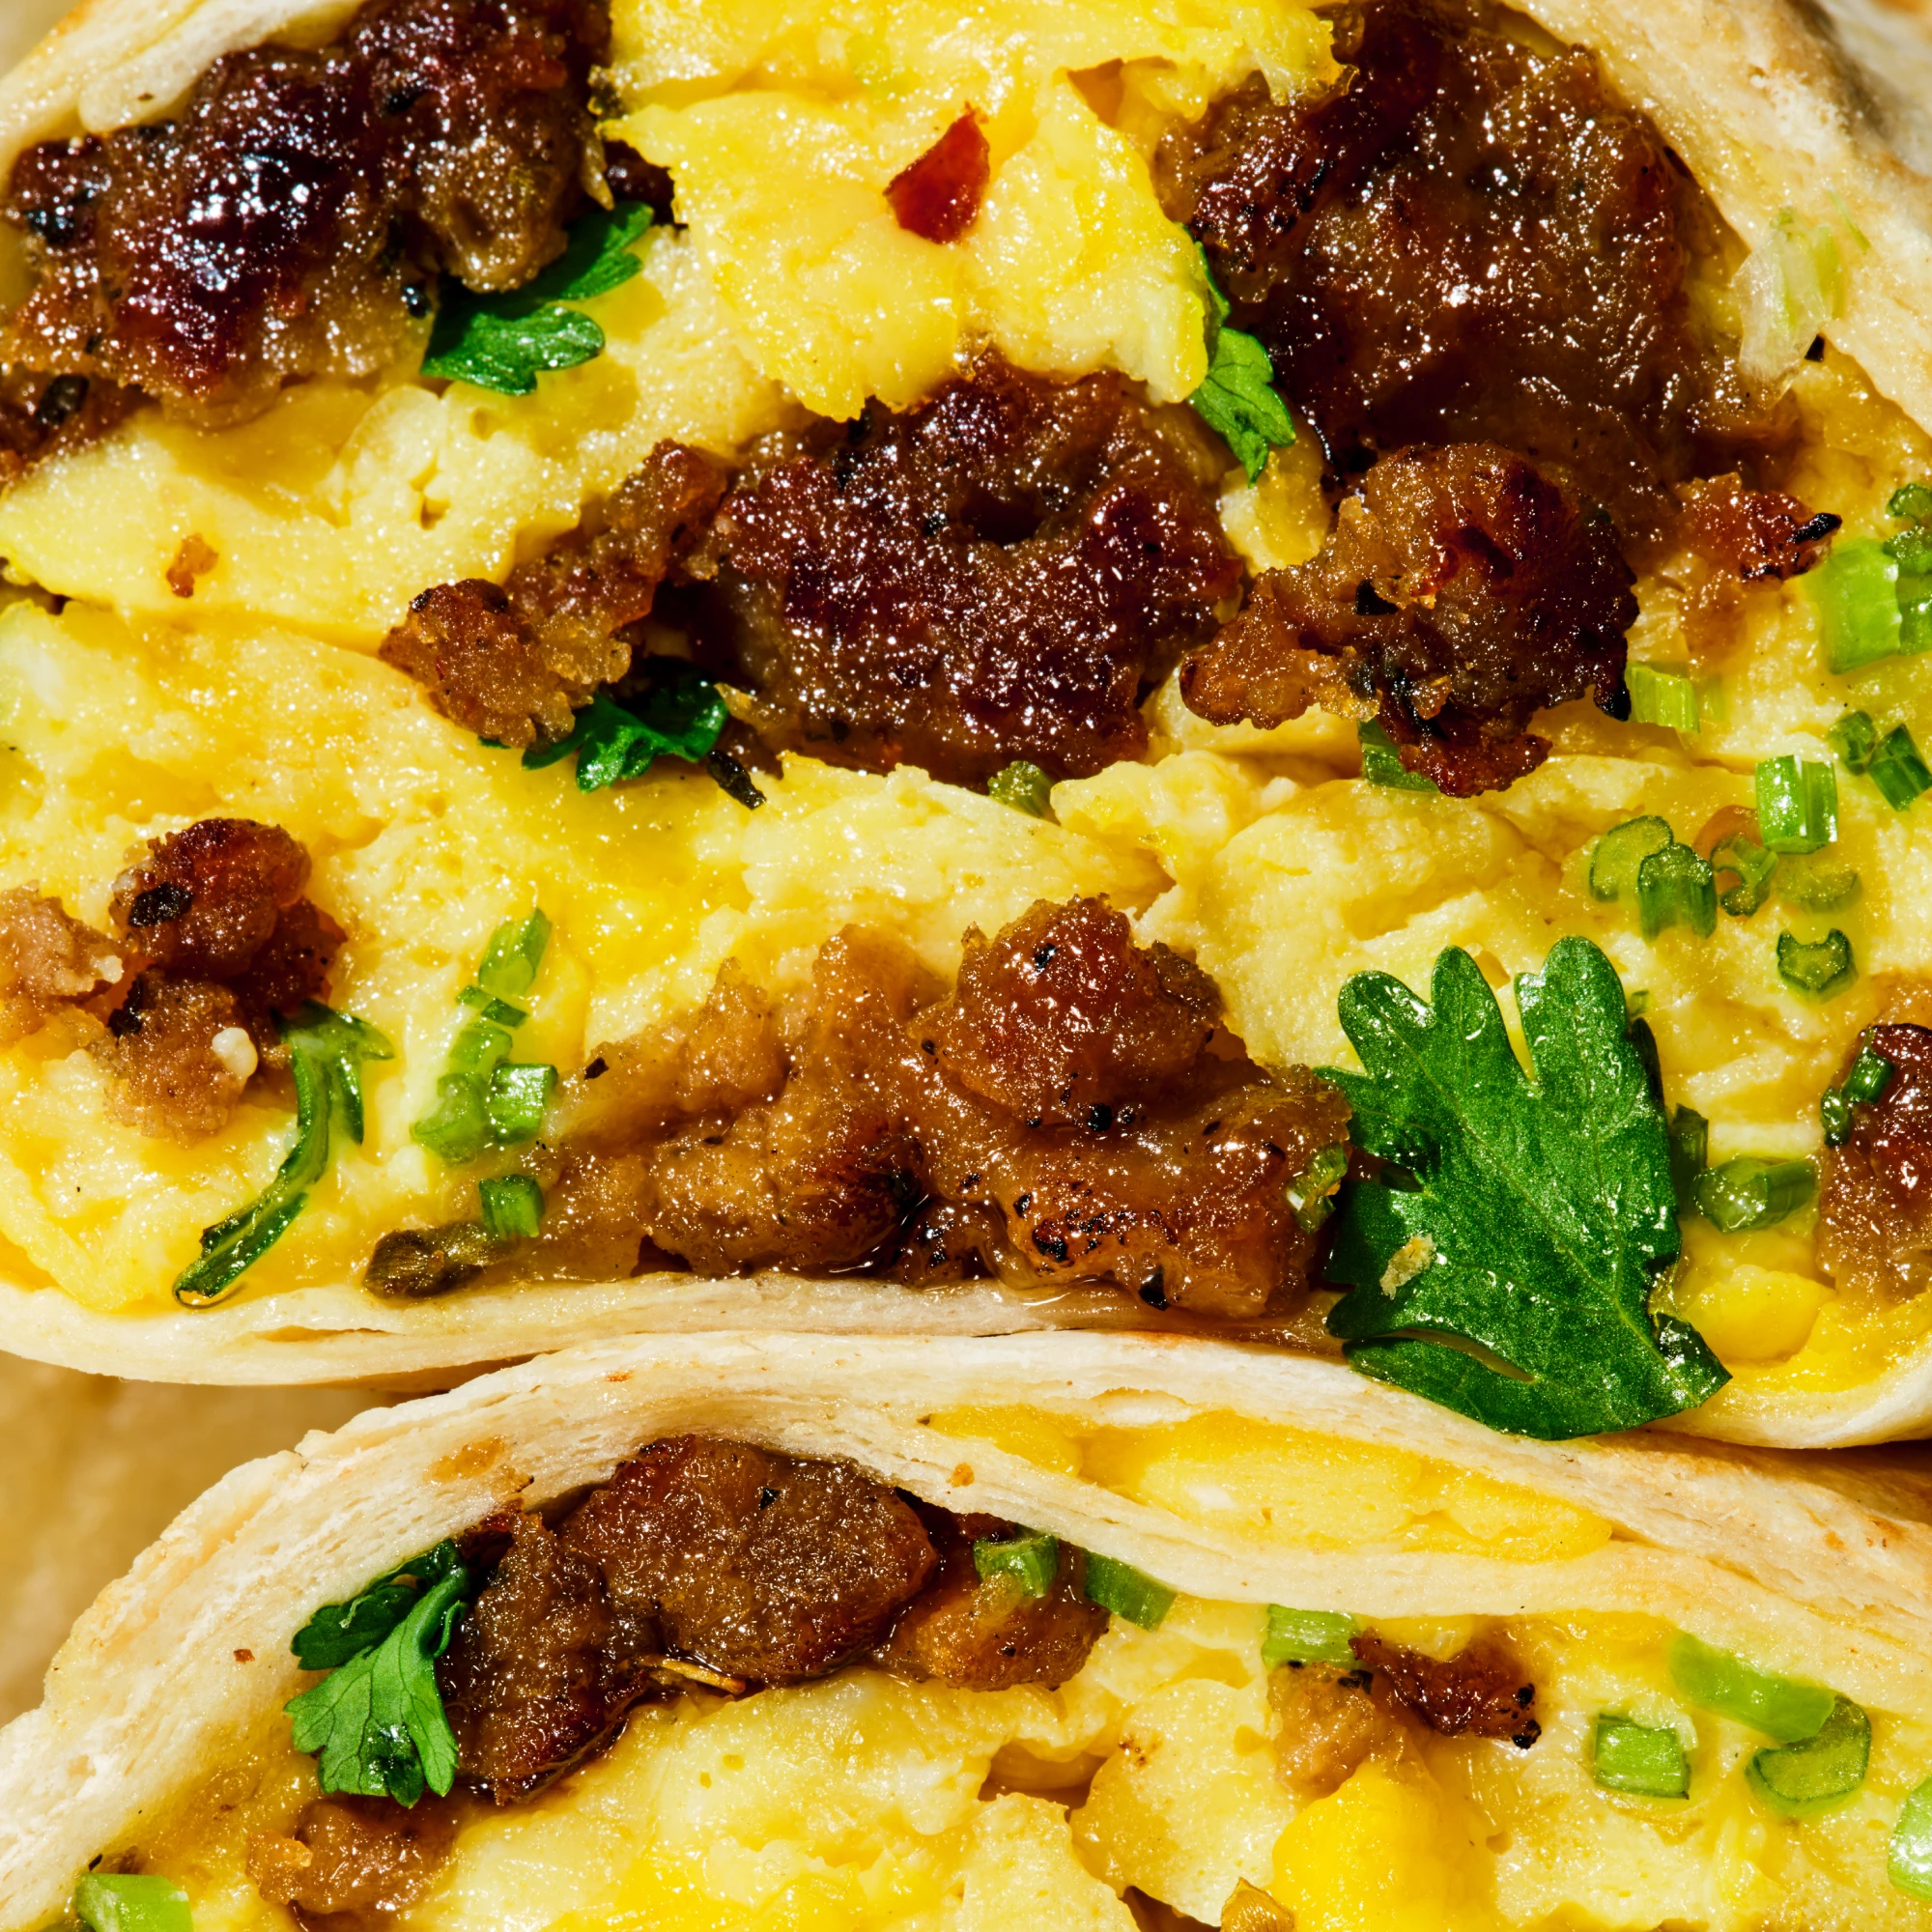 Impossible Savory Ground Sausage in breakfast tacos